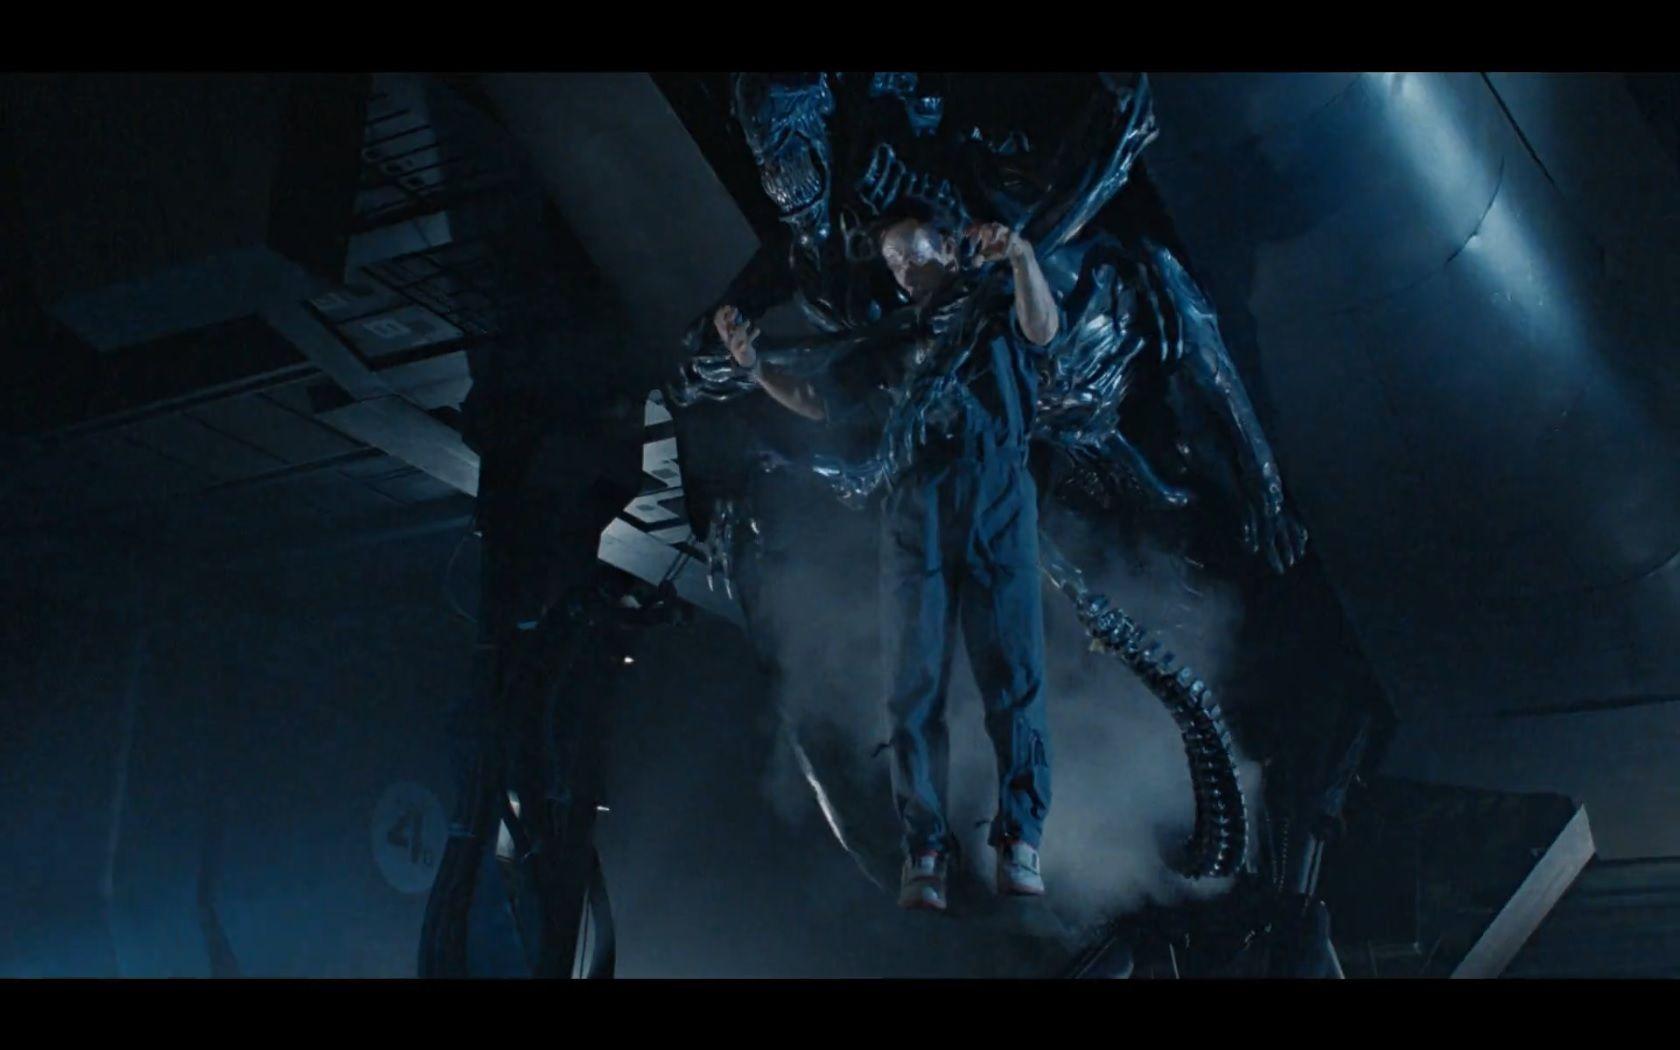 How did the queen get on to the ship in Aliens? Fiction